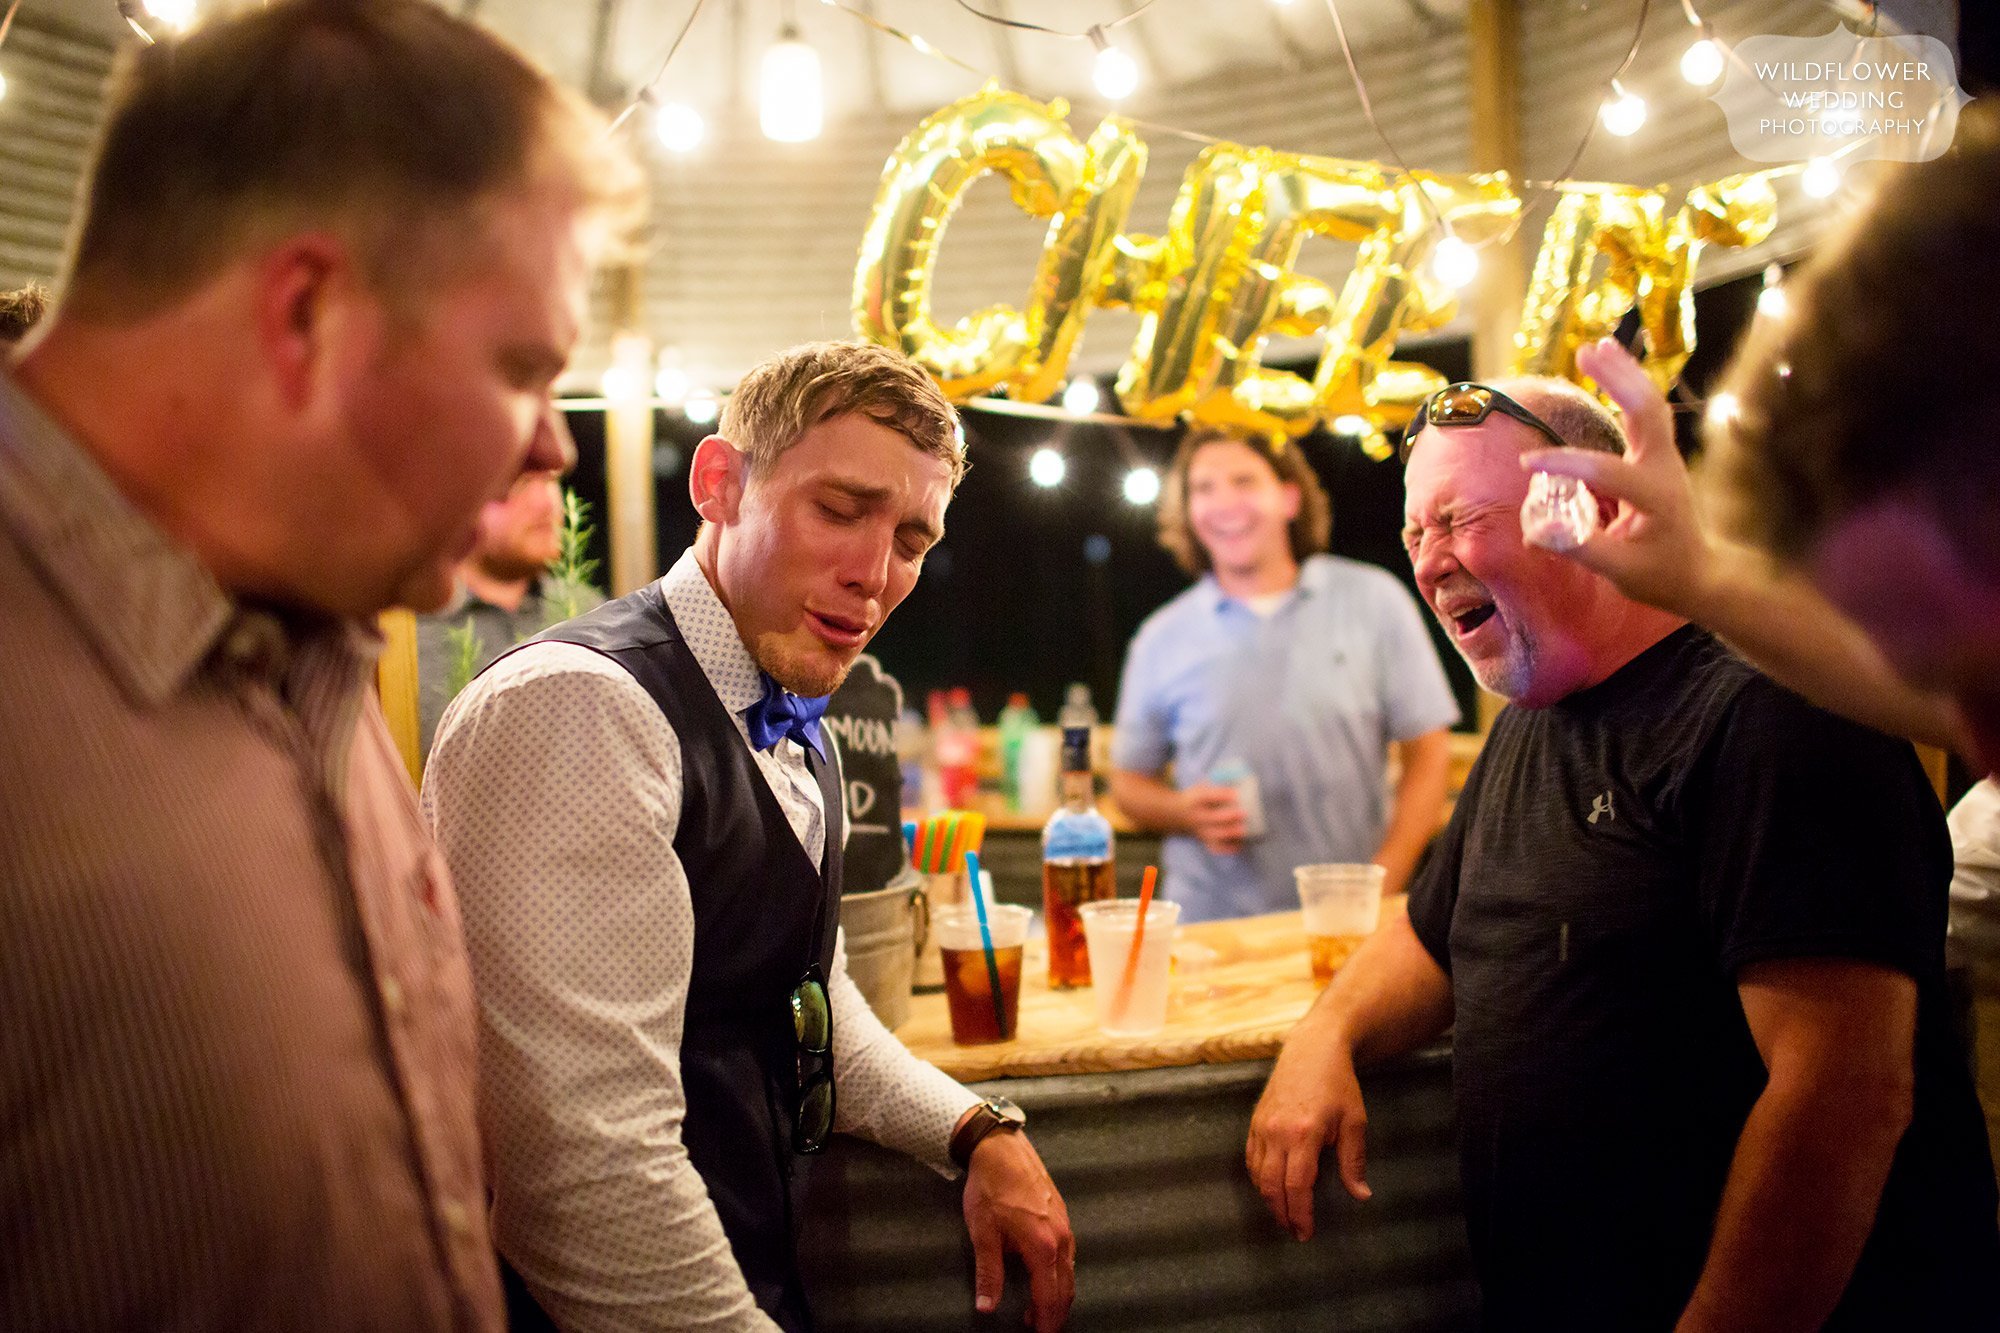 Hilarious photos of faces after doing alcohol shots at the silo bar at this country wedding in MO.